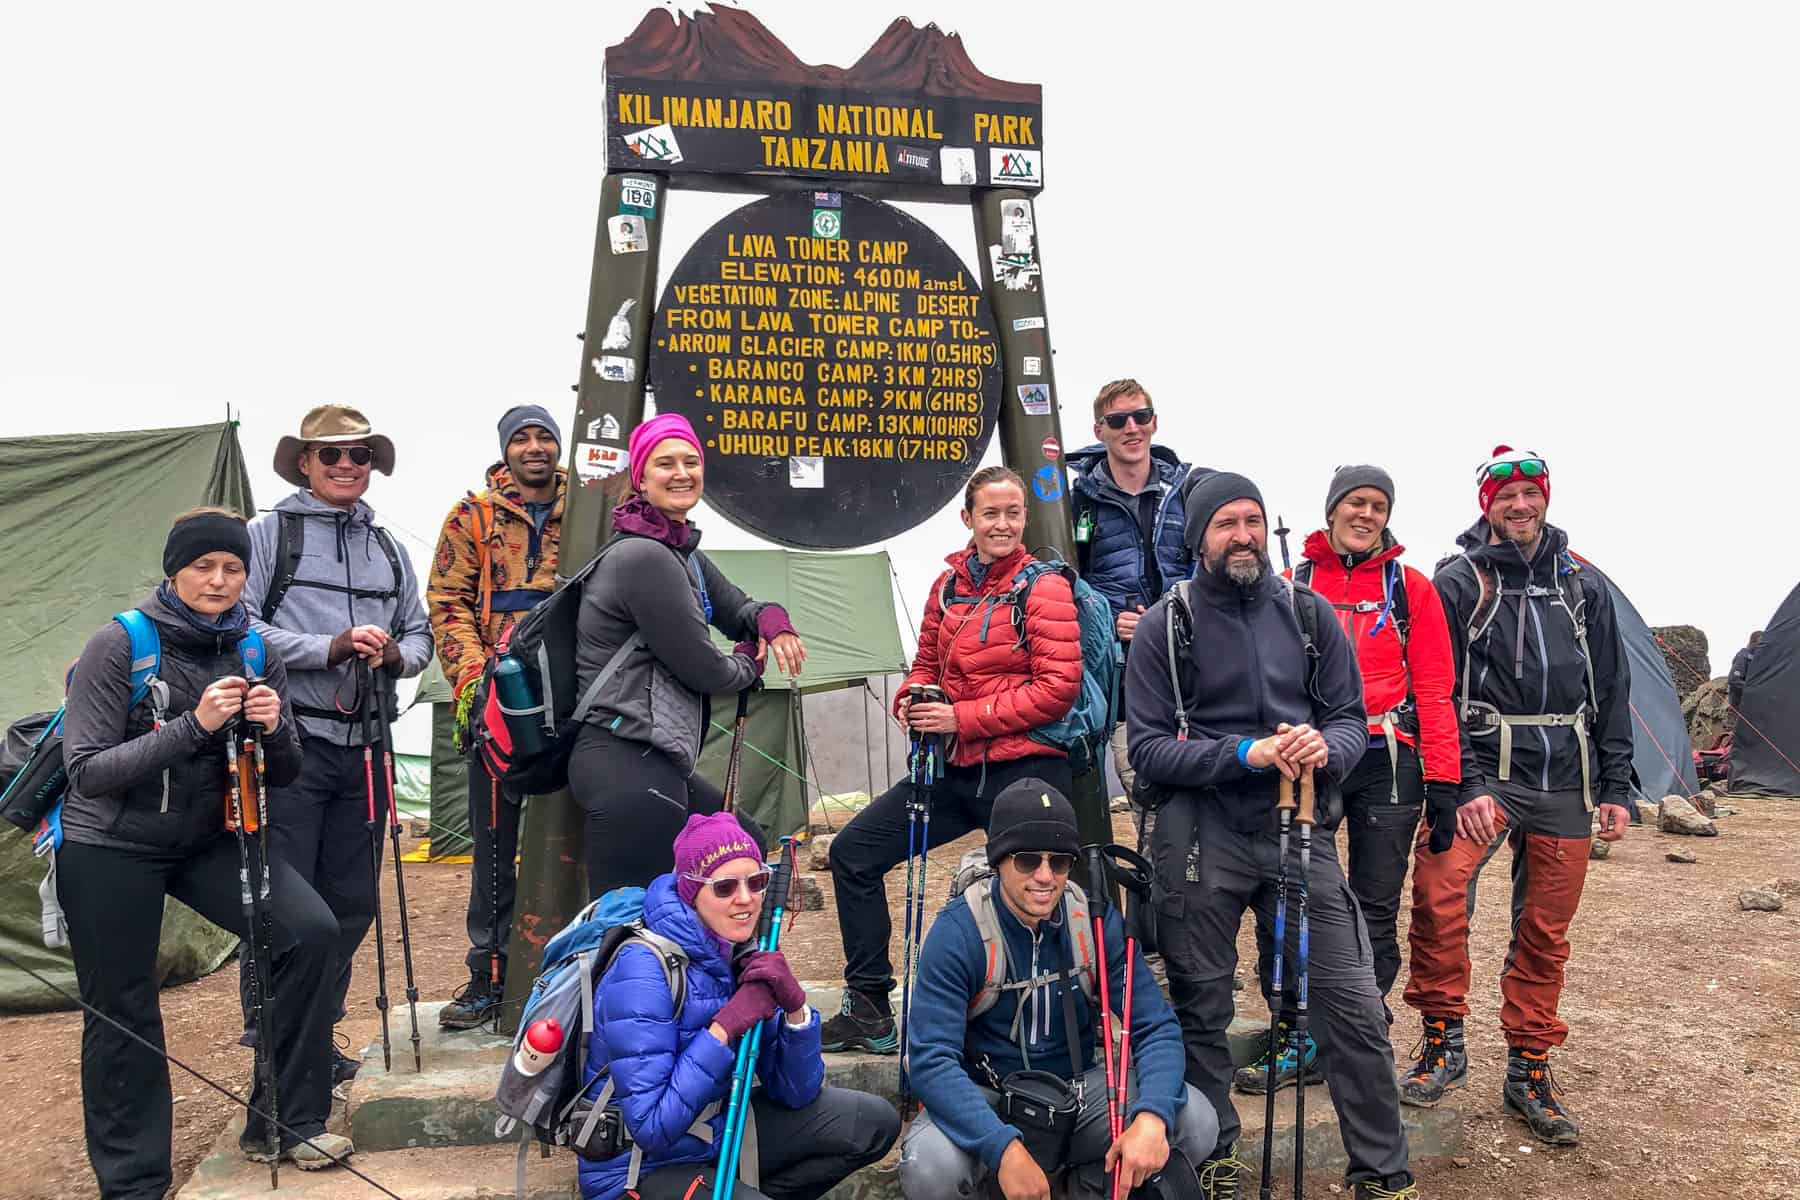 A Kilimanjaro trek group, looking tired, at the Lava Tower Sign with green camp tents set up behind them